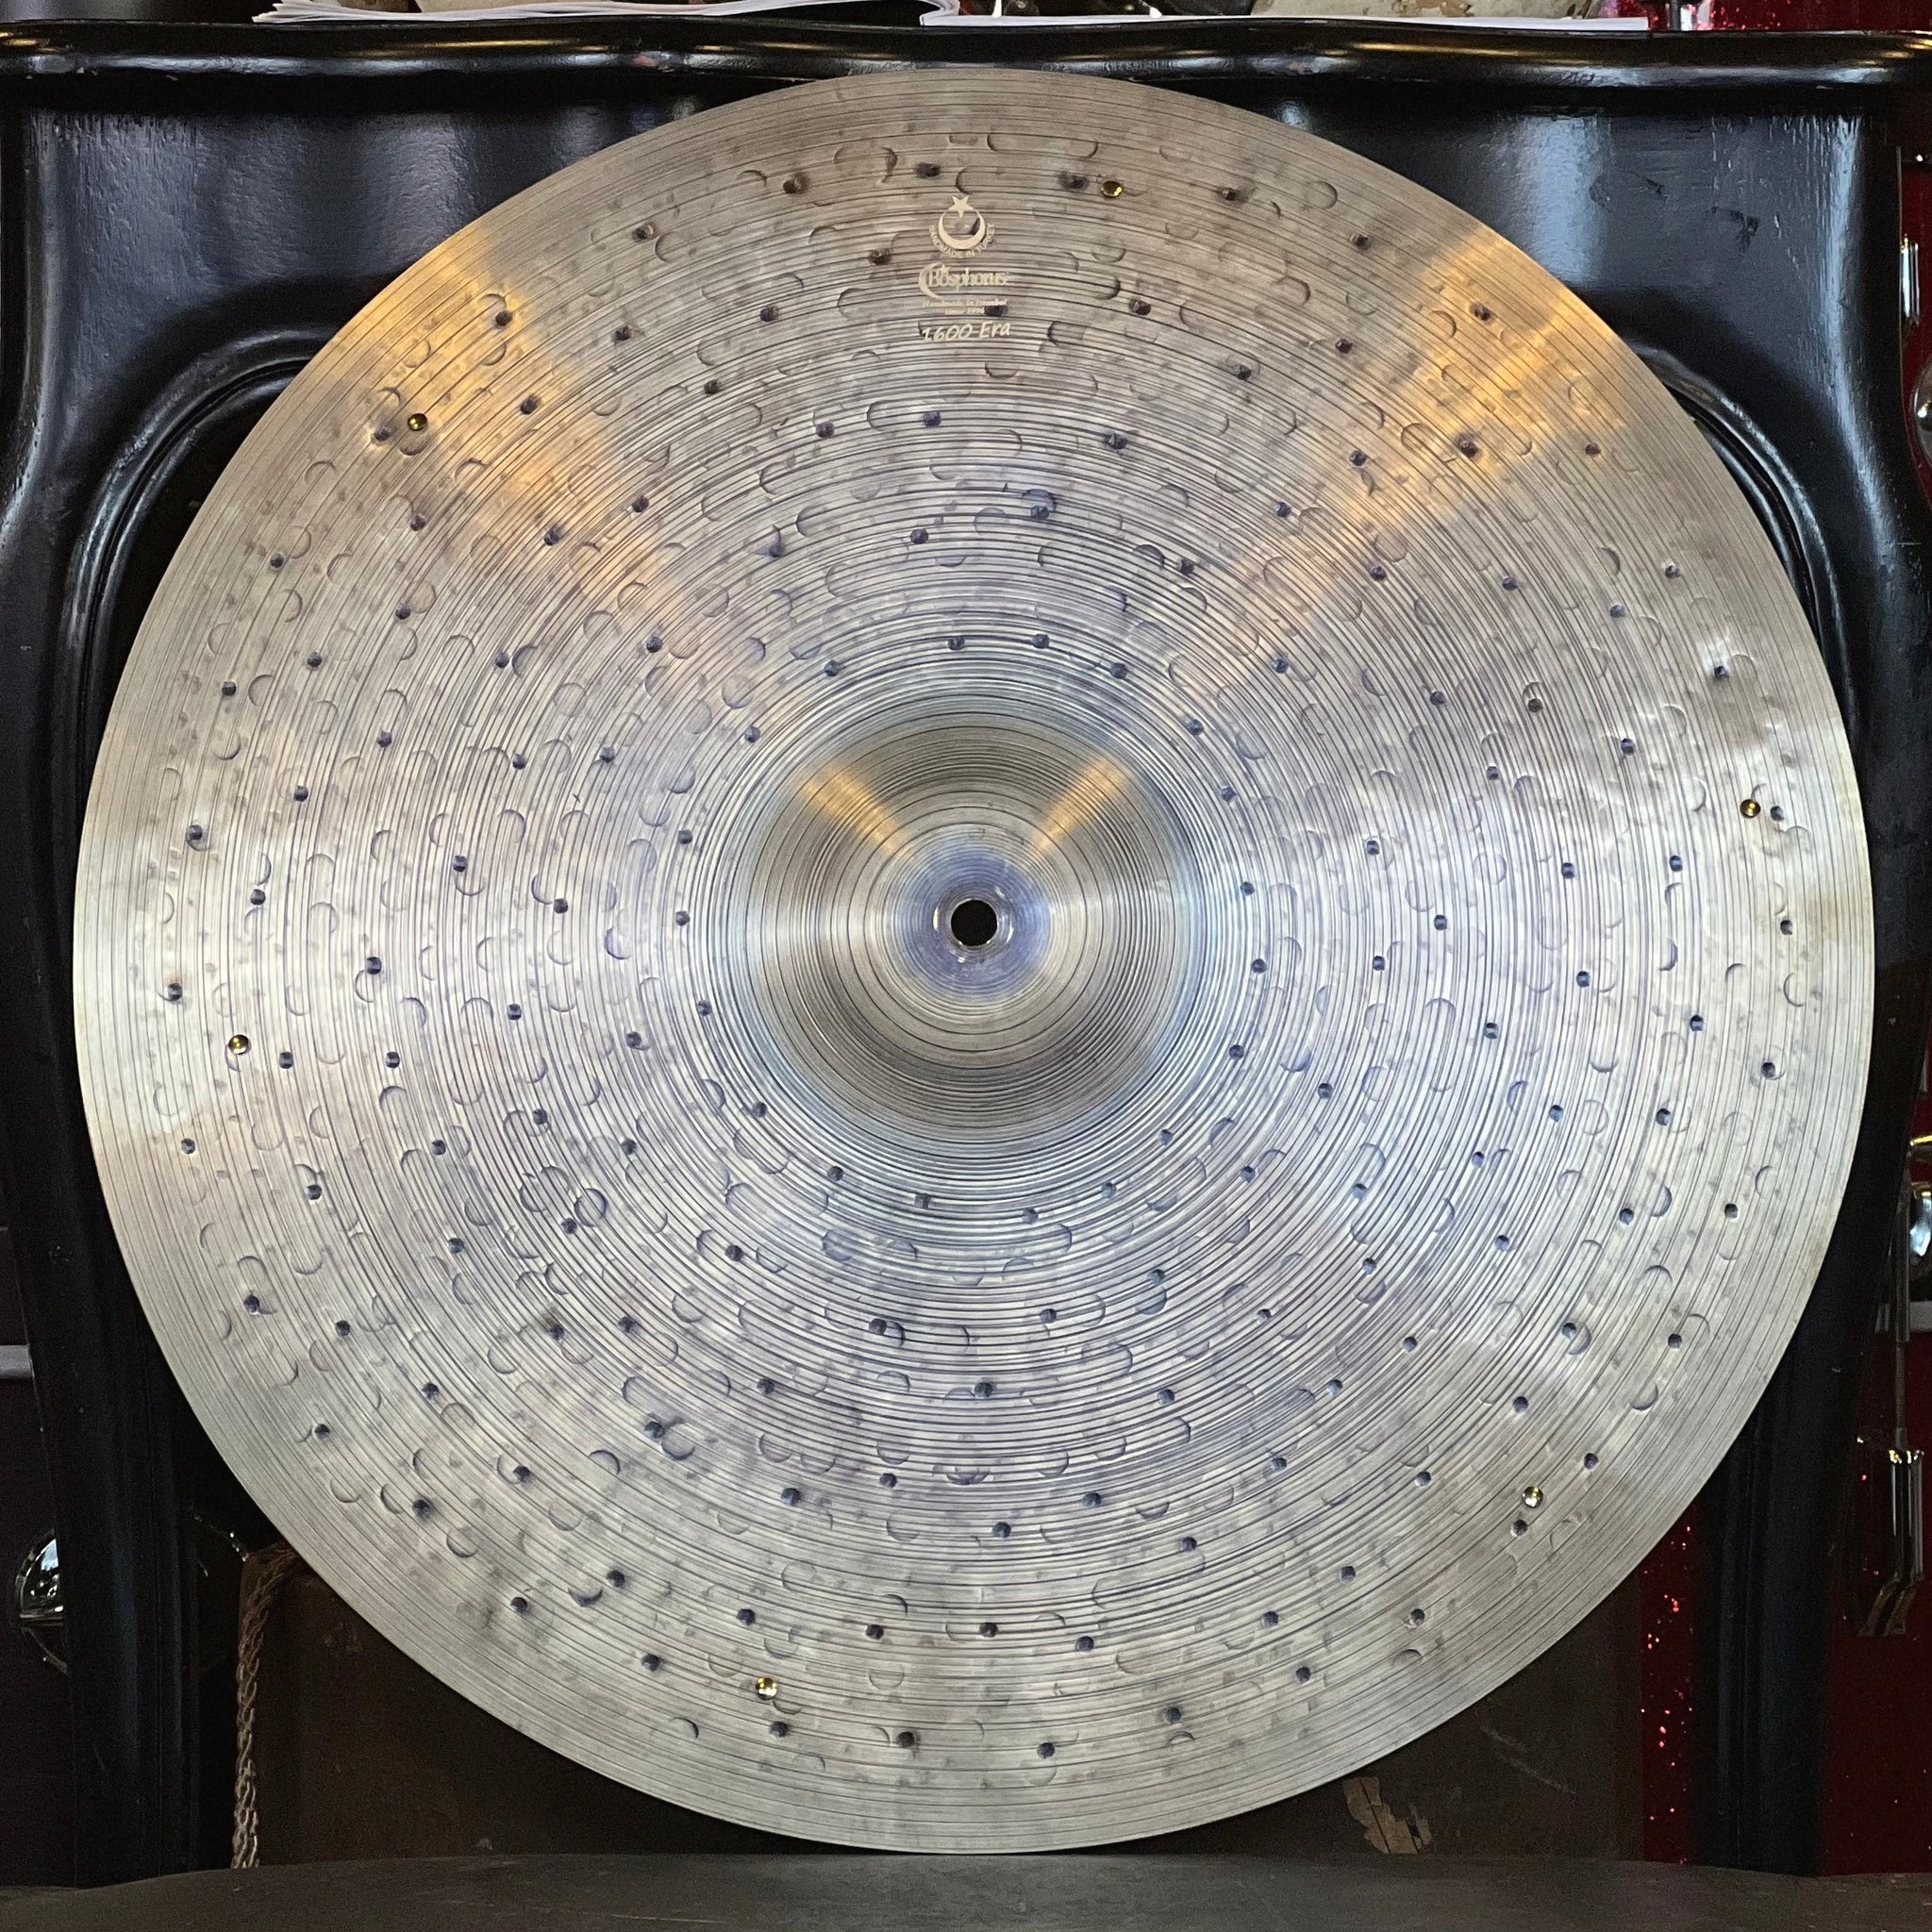 NEW Bosphorus 20" 1600 Era Over-hammered Ride Cymbal w/ 6 Rivets - 1761g